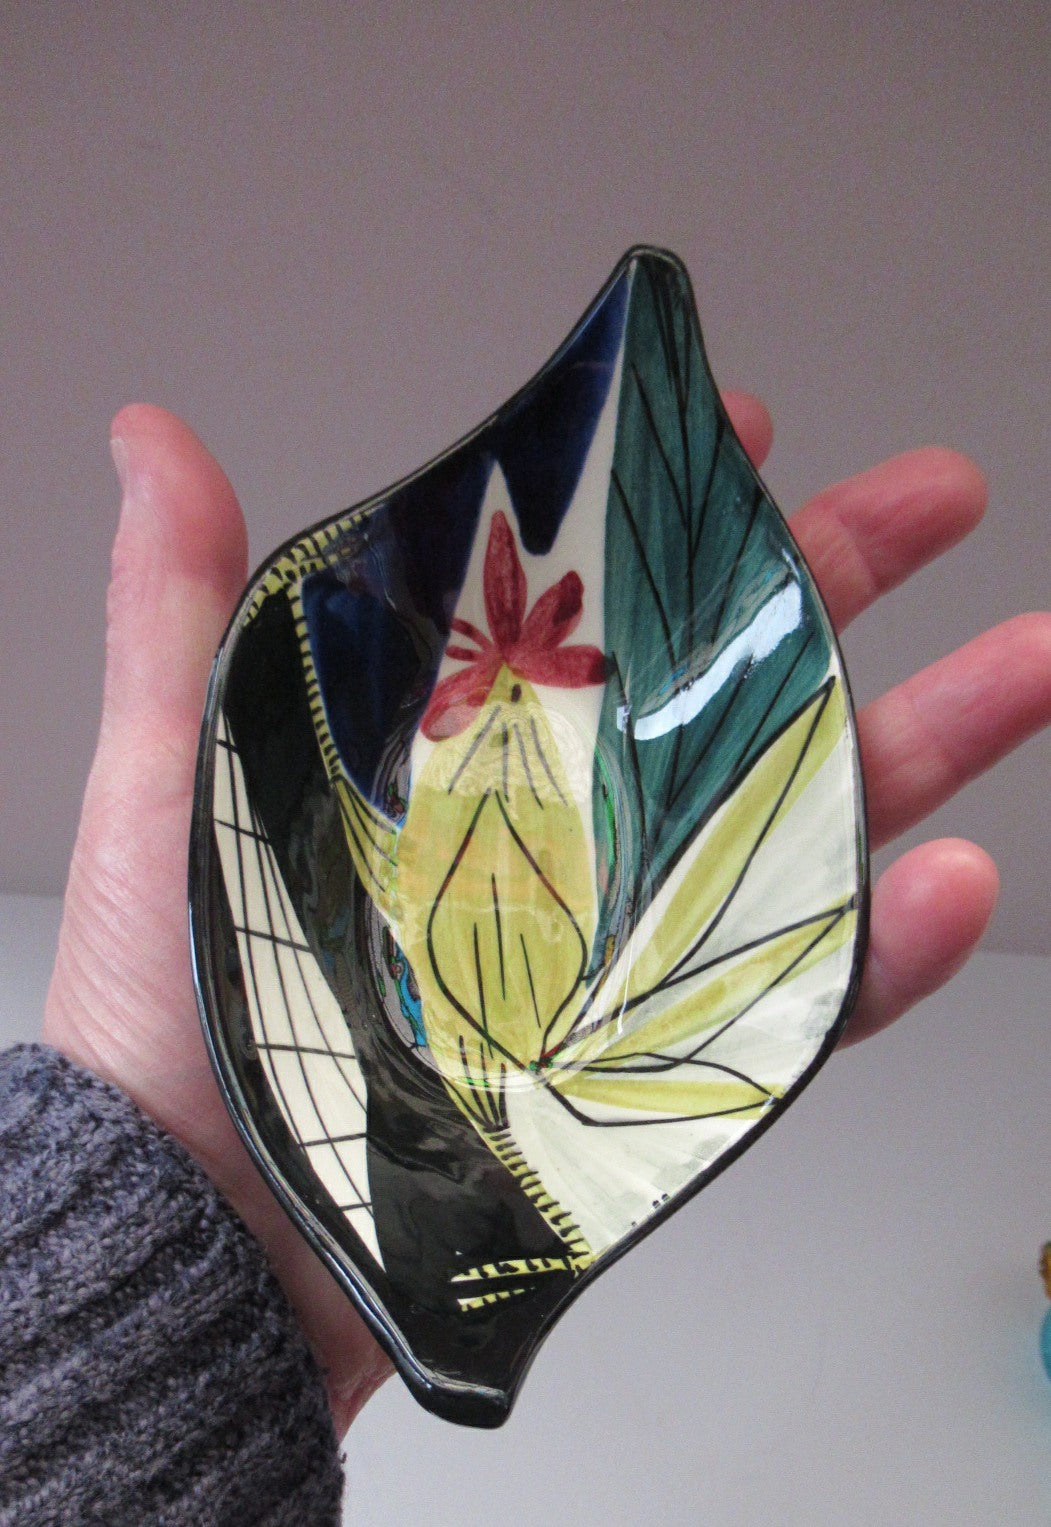 Highly Collectable Vintage Swedish STAVANGERFLINT Abstract Bird Design Dish. Designed by Inger Waage